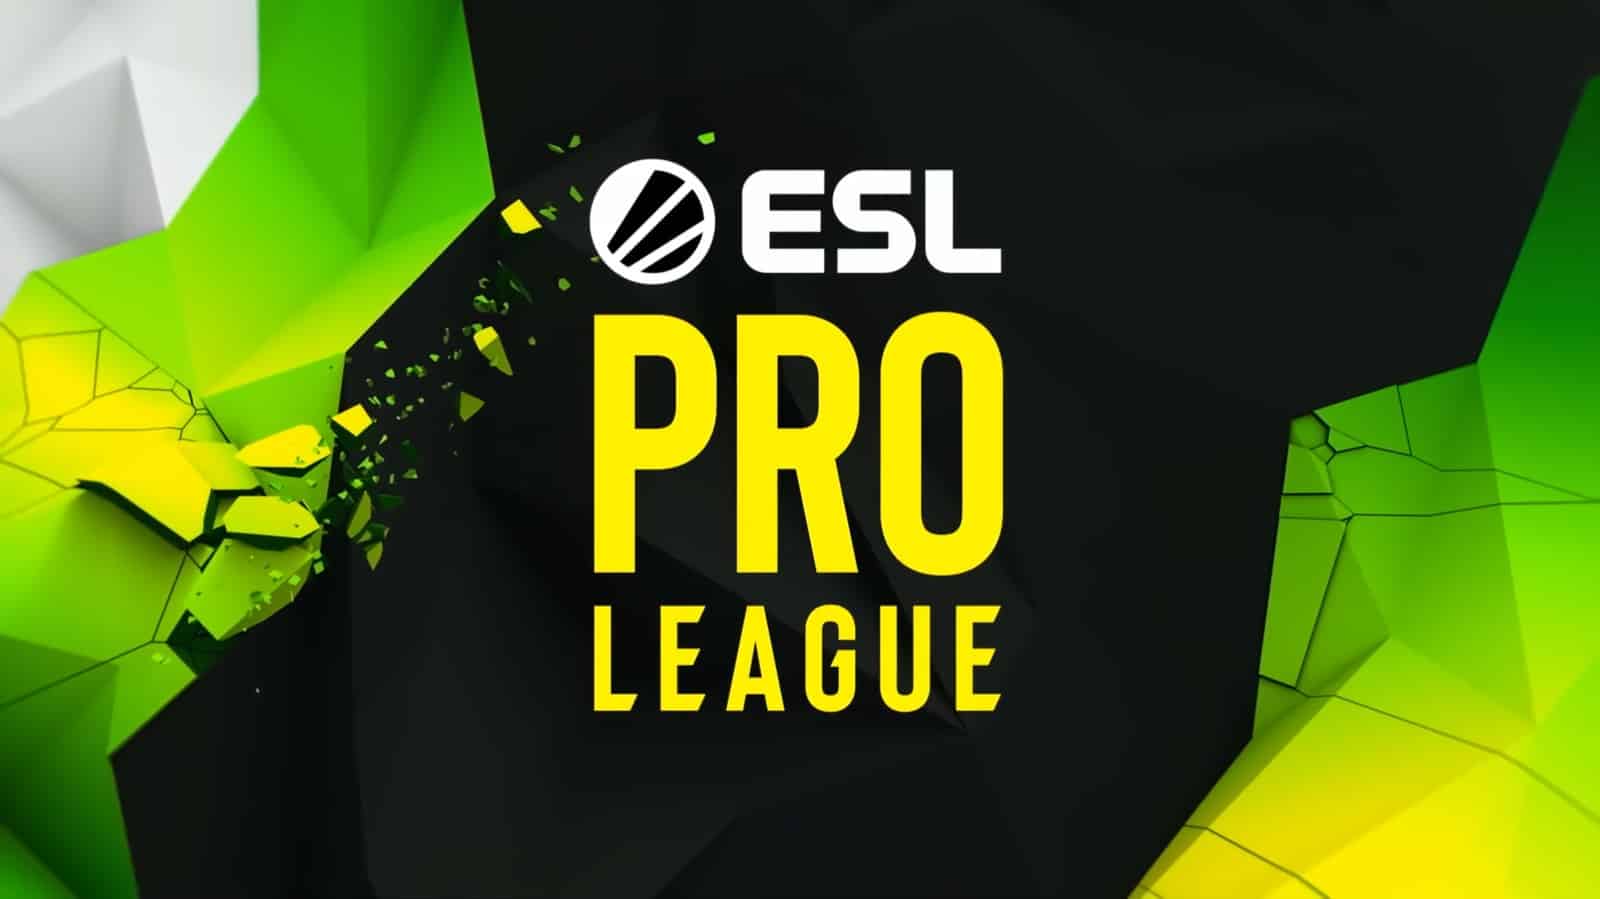 The words "ESL Pro League" appear on a black, green and white background.